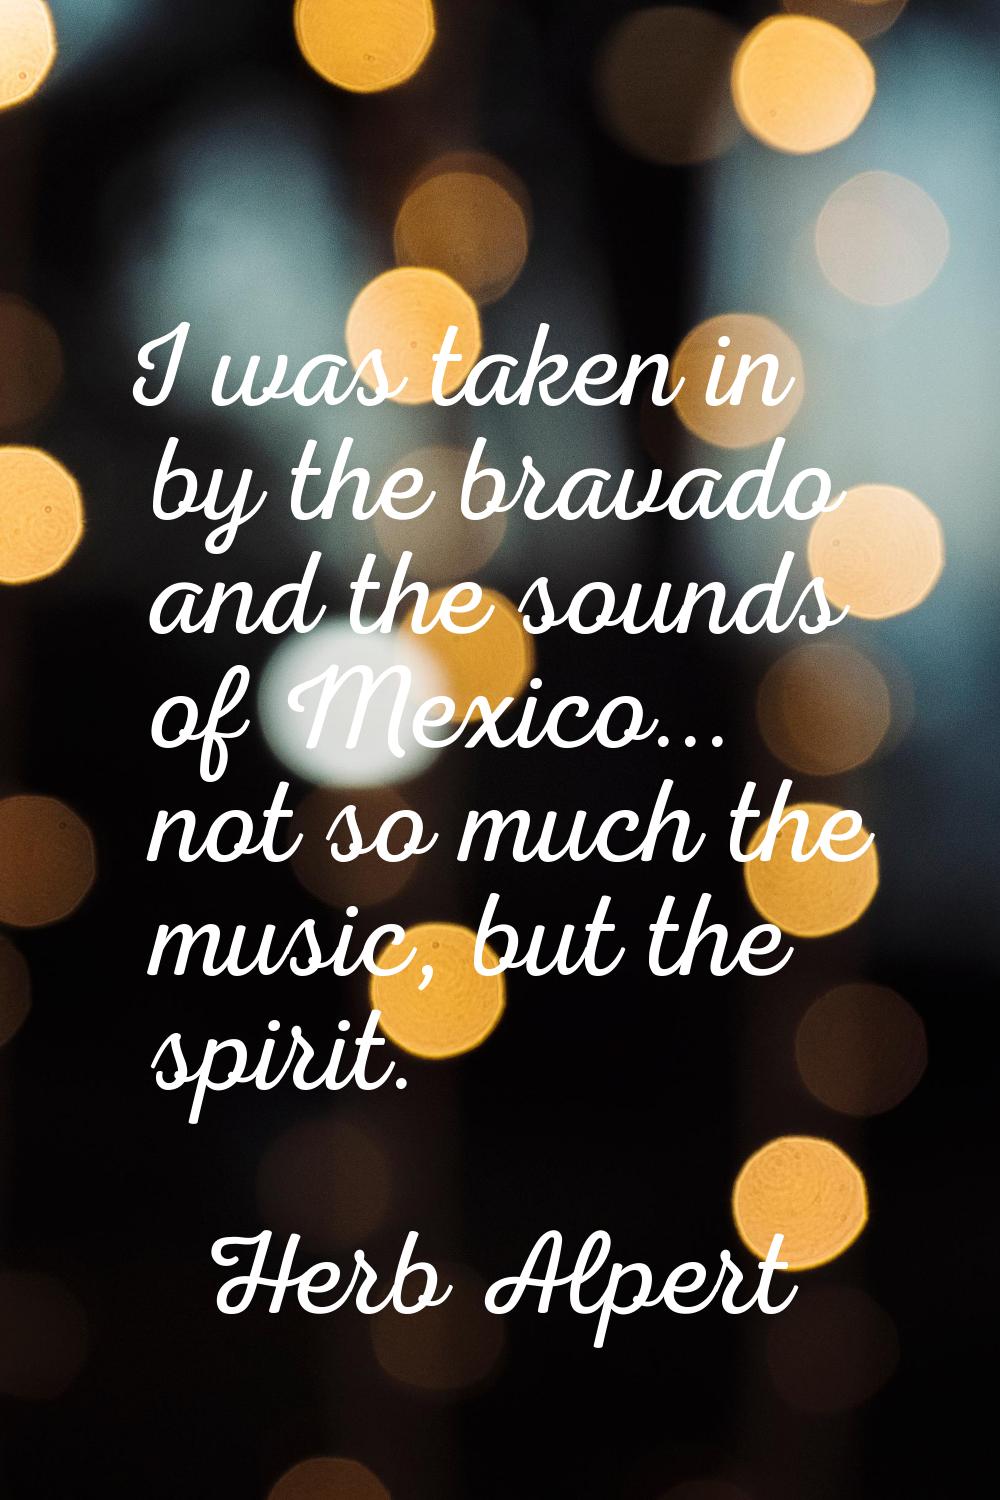 I was taken in by the bravado and the sounds of Mexico... not so much the music, but the spirit.